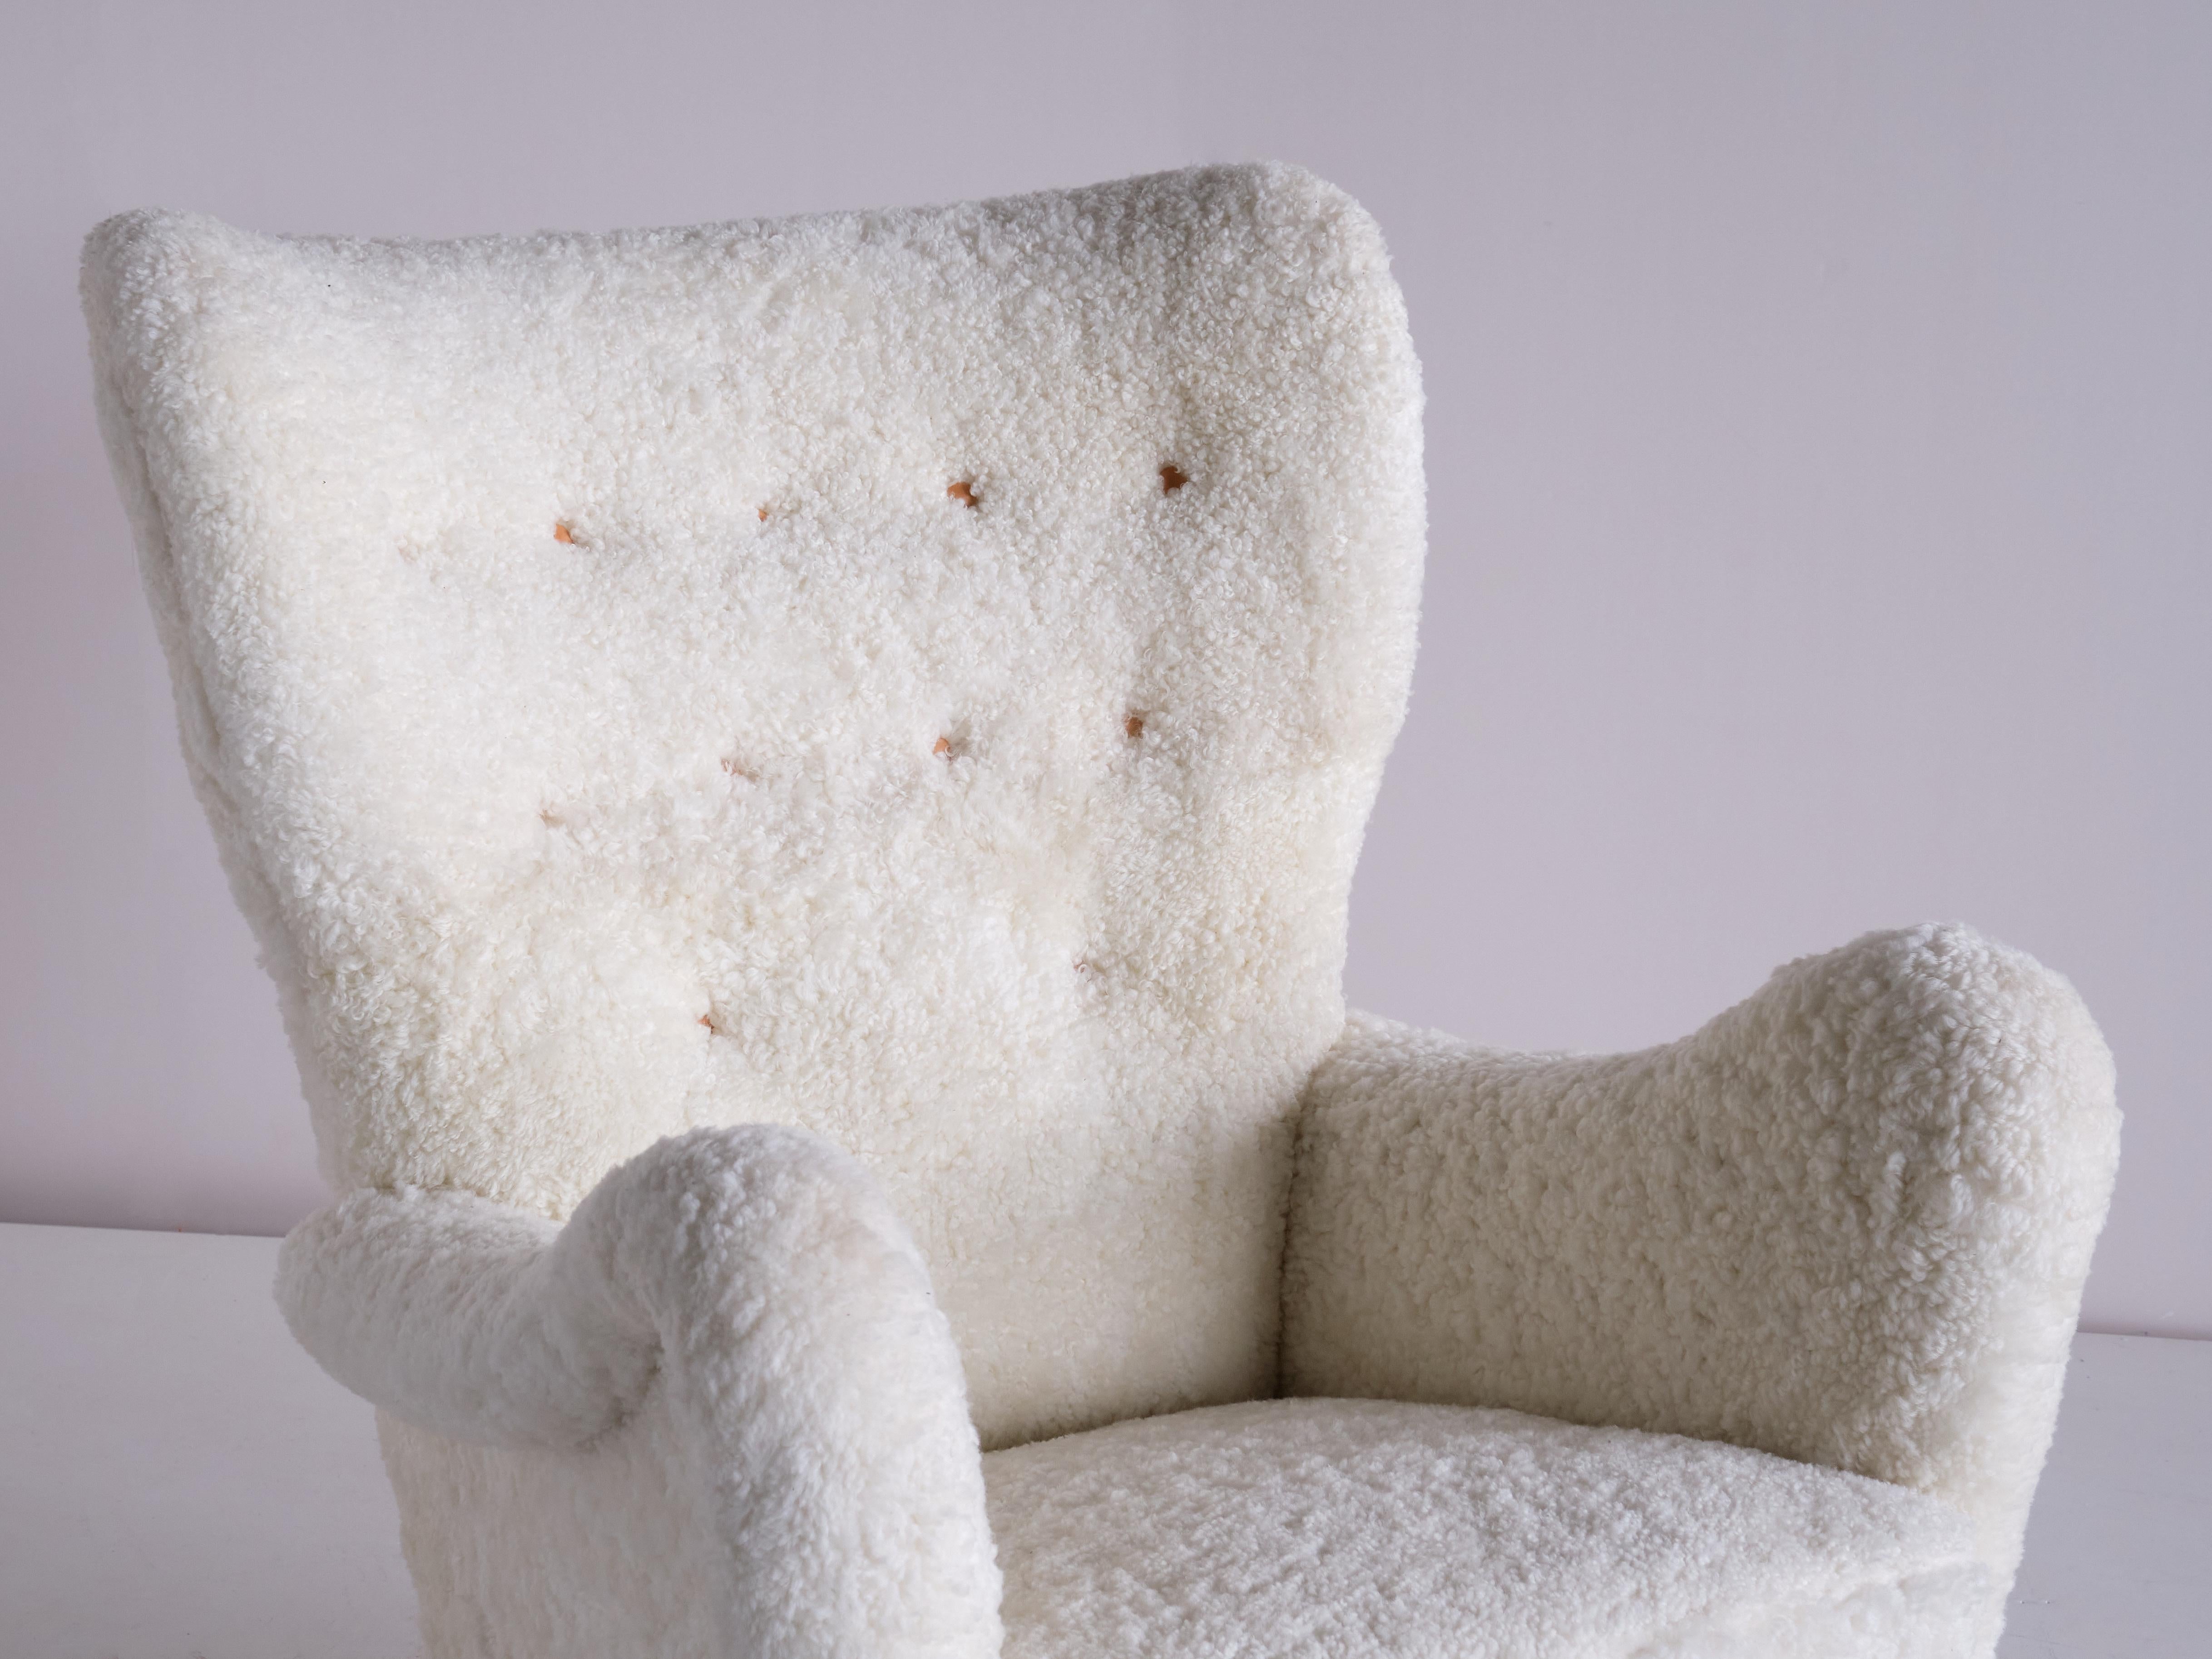 Otto Schulz Armchair in White Sheepskin and Beech, Boet, Sweden, 1940s For Sale 4